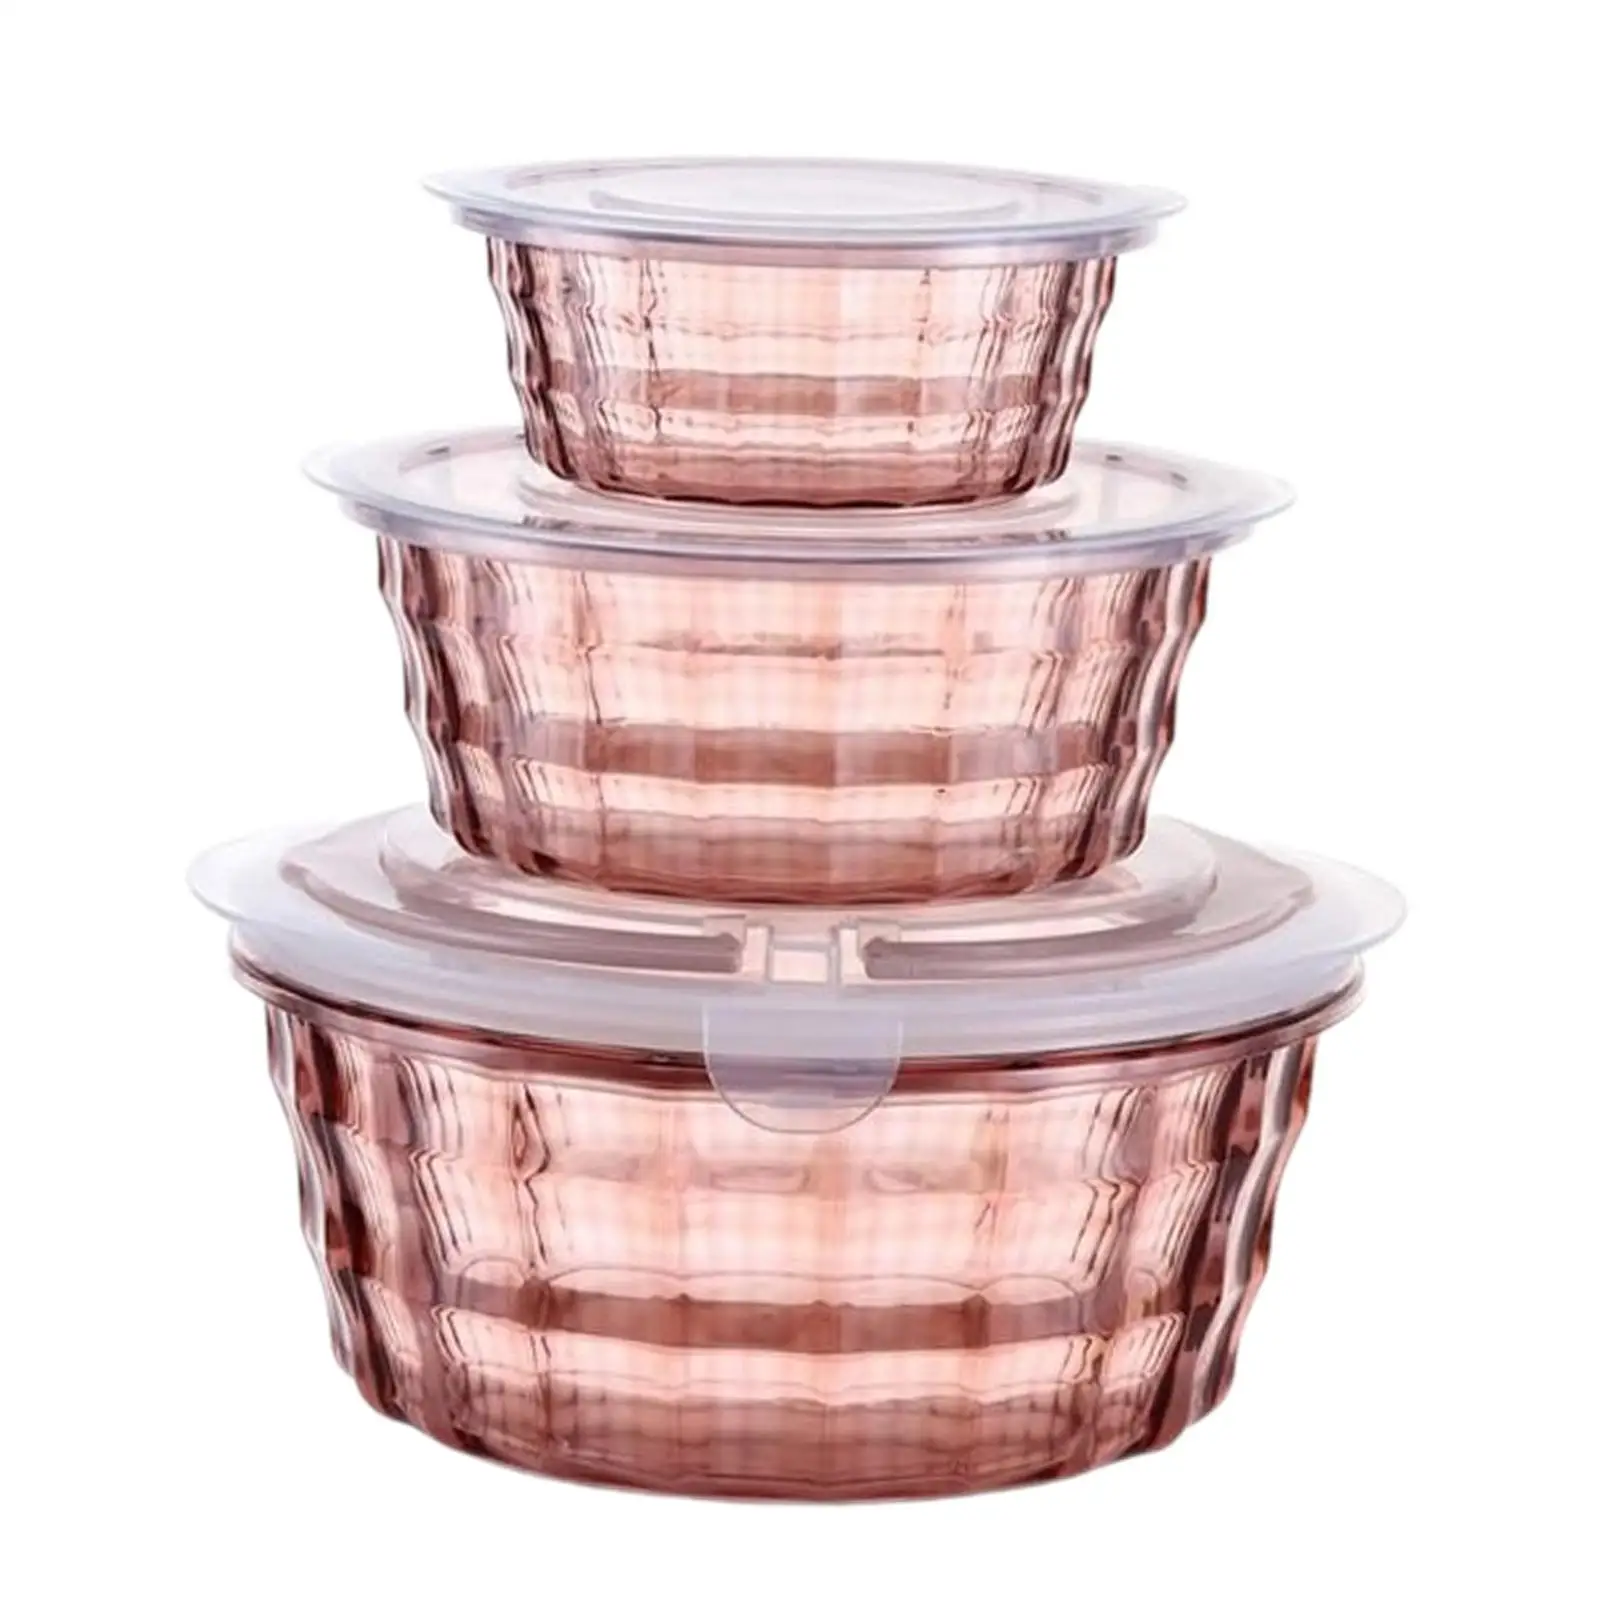 3x Salad Bowl Kitchen Tableware Multifunctional Clear Serving Bowl for Noodles Berries Mashed Potatoes Steamed Vegetables Party